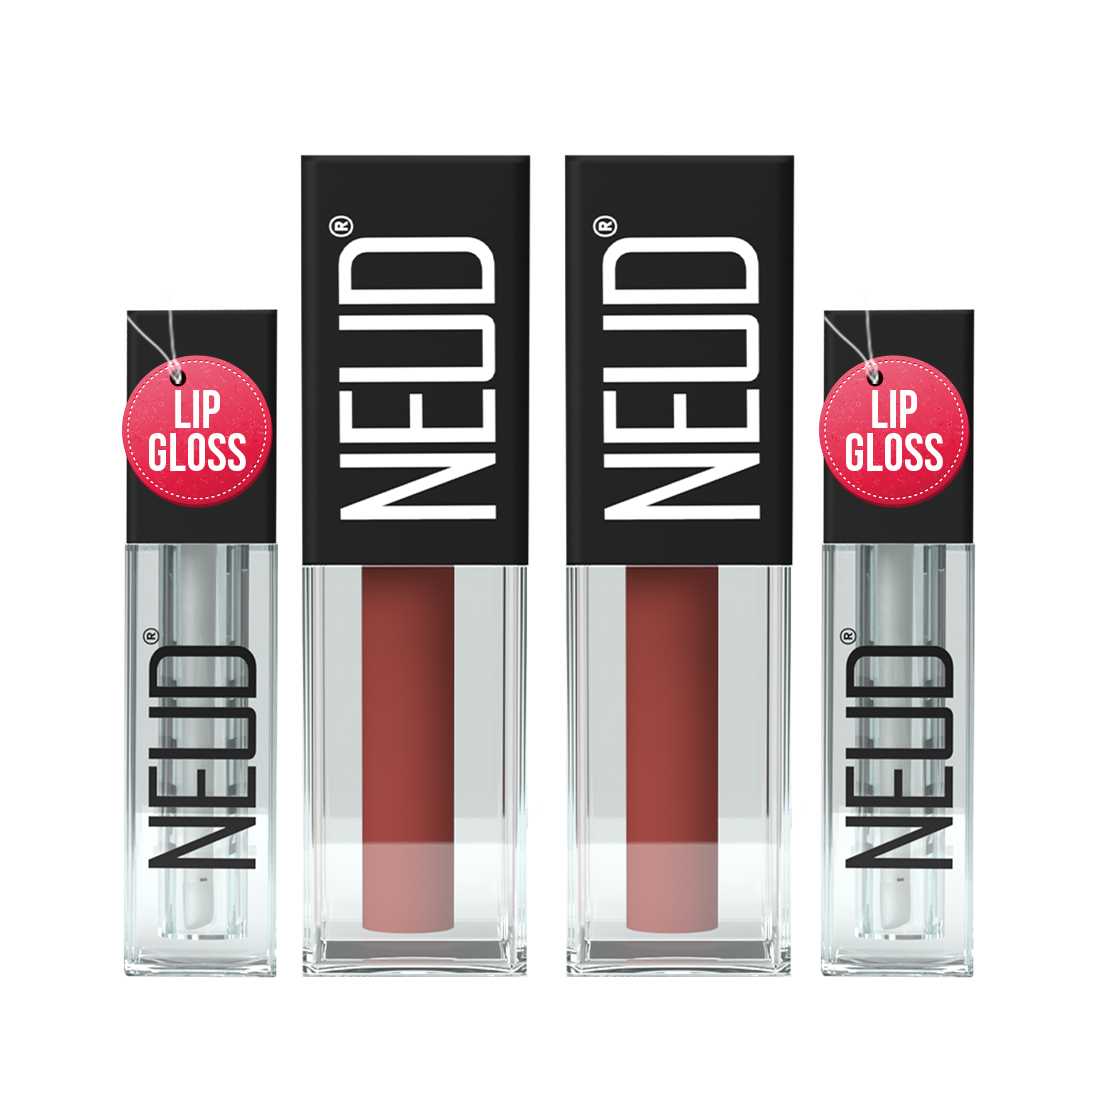 NEUD Matte Liquid Lipstick Jolly Coral with Jojoba Oil, Vitamin E and Almond Oil - Smudge Proof 12-hour Stay Formula with Free Lip Gloss